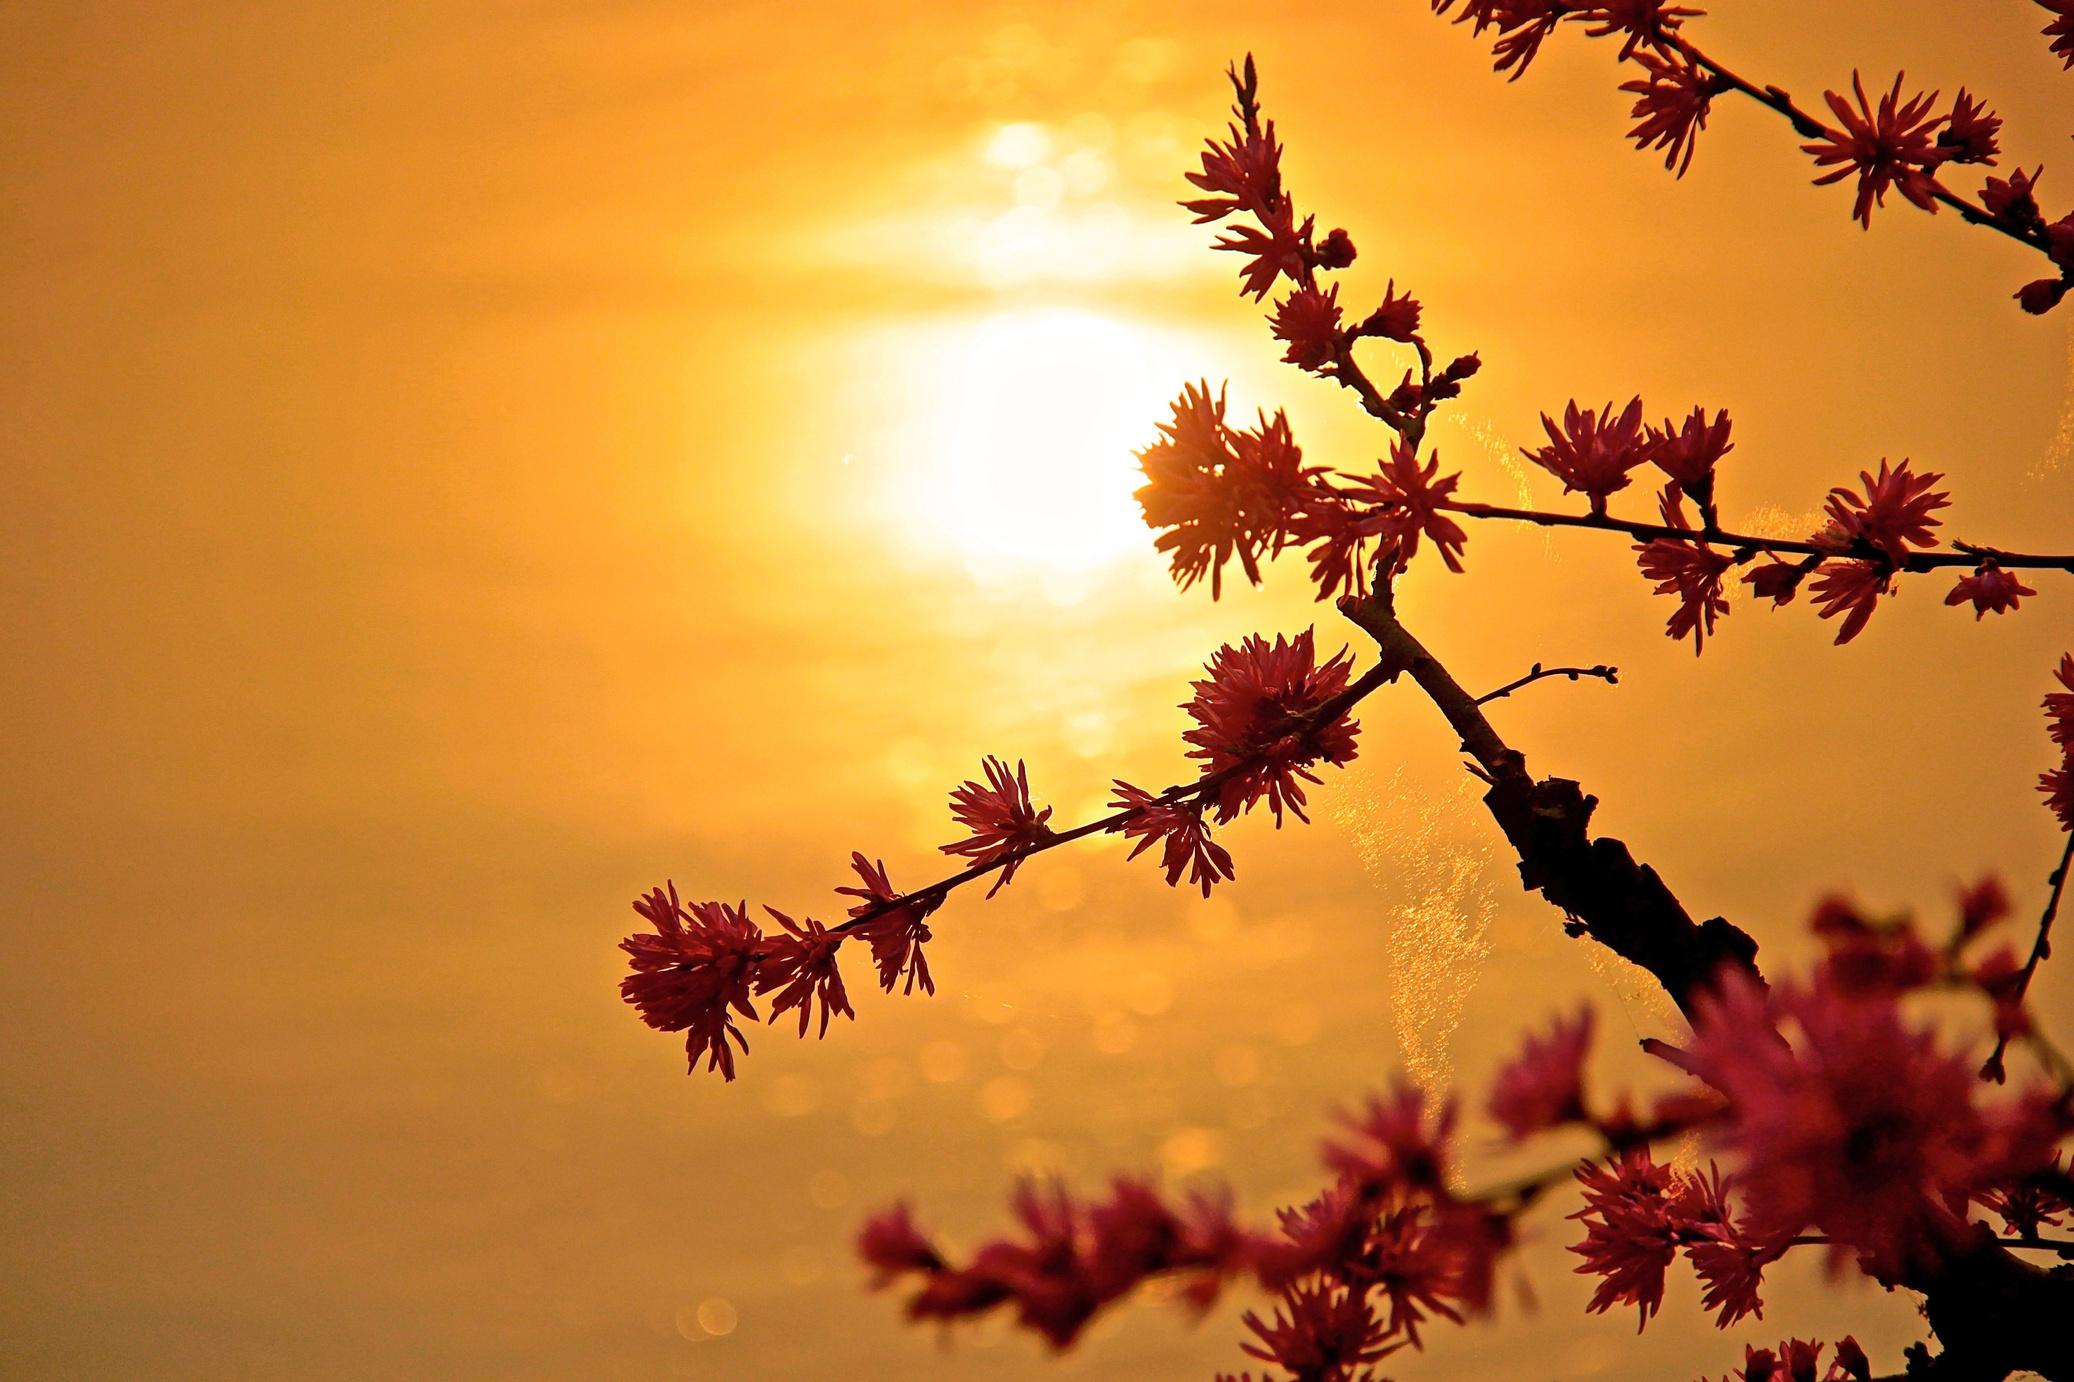 Tree Blossoms over Sunset